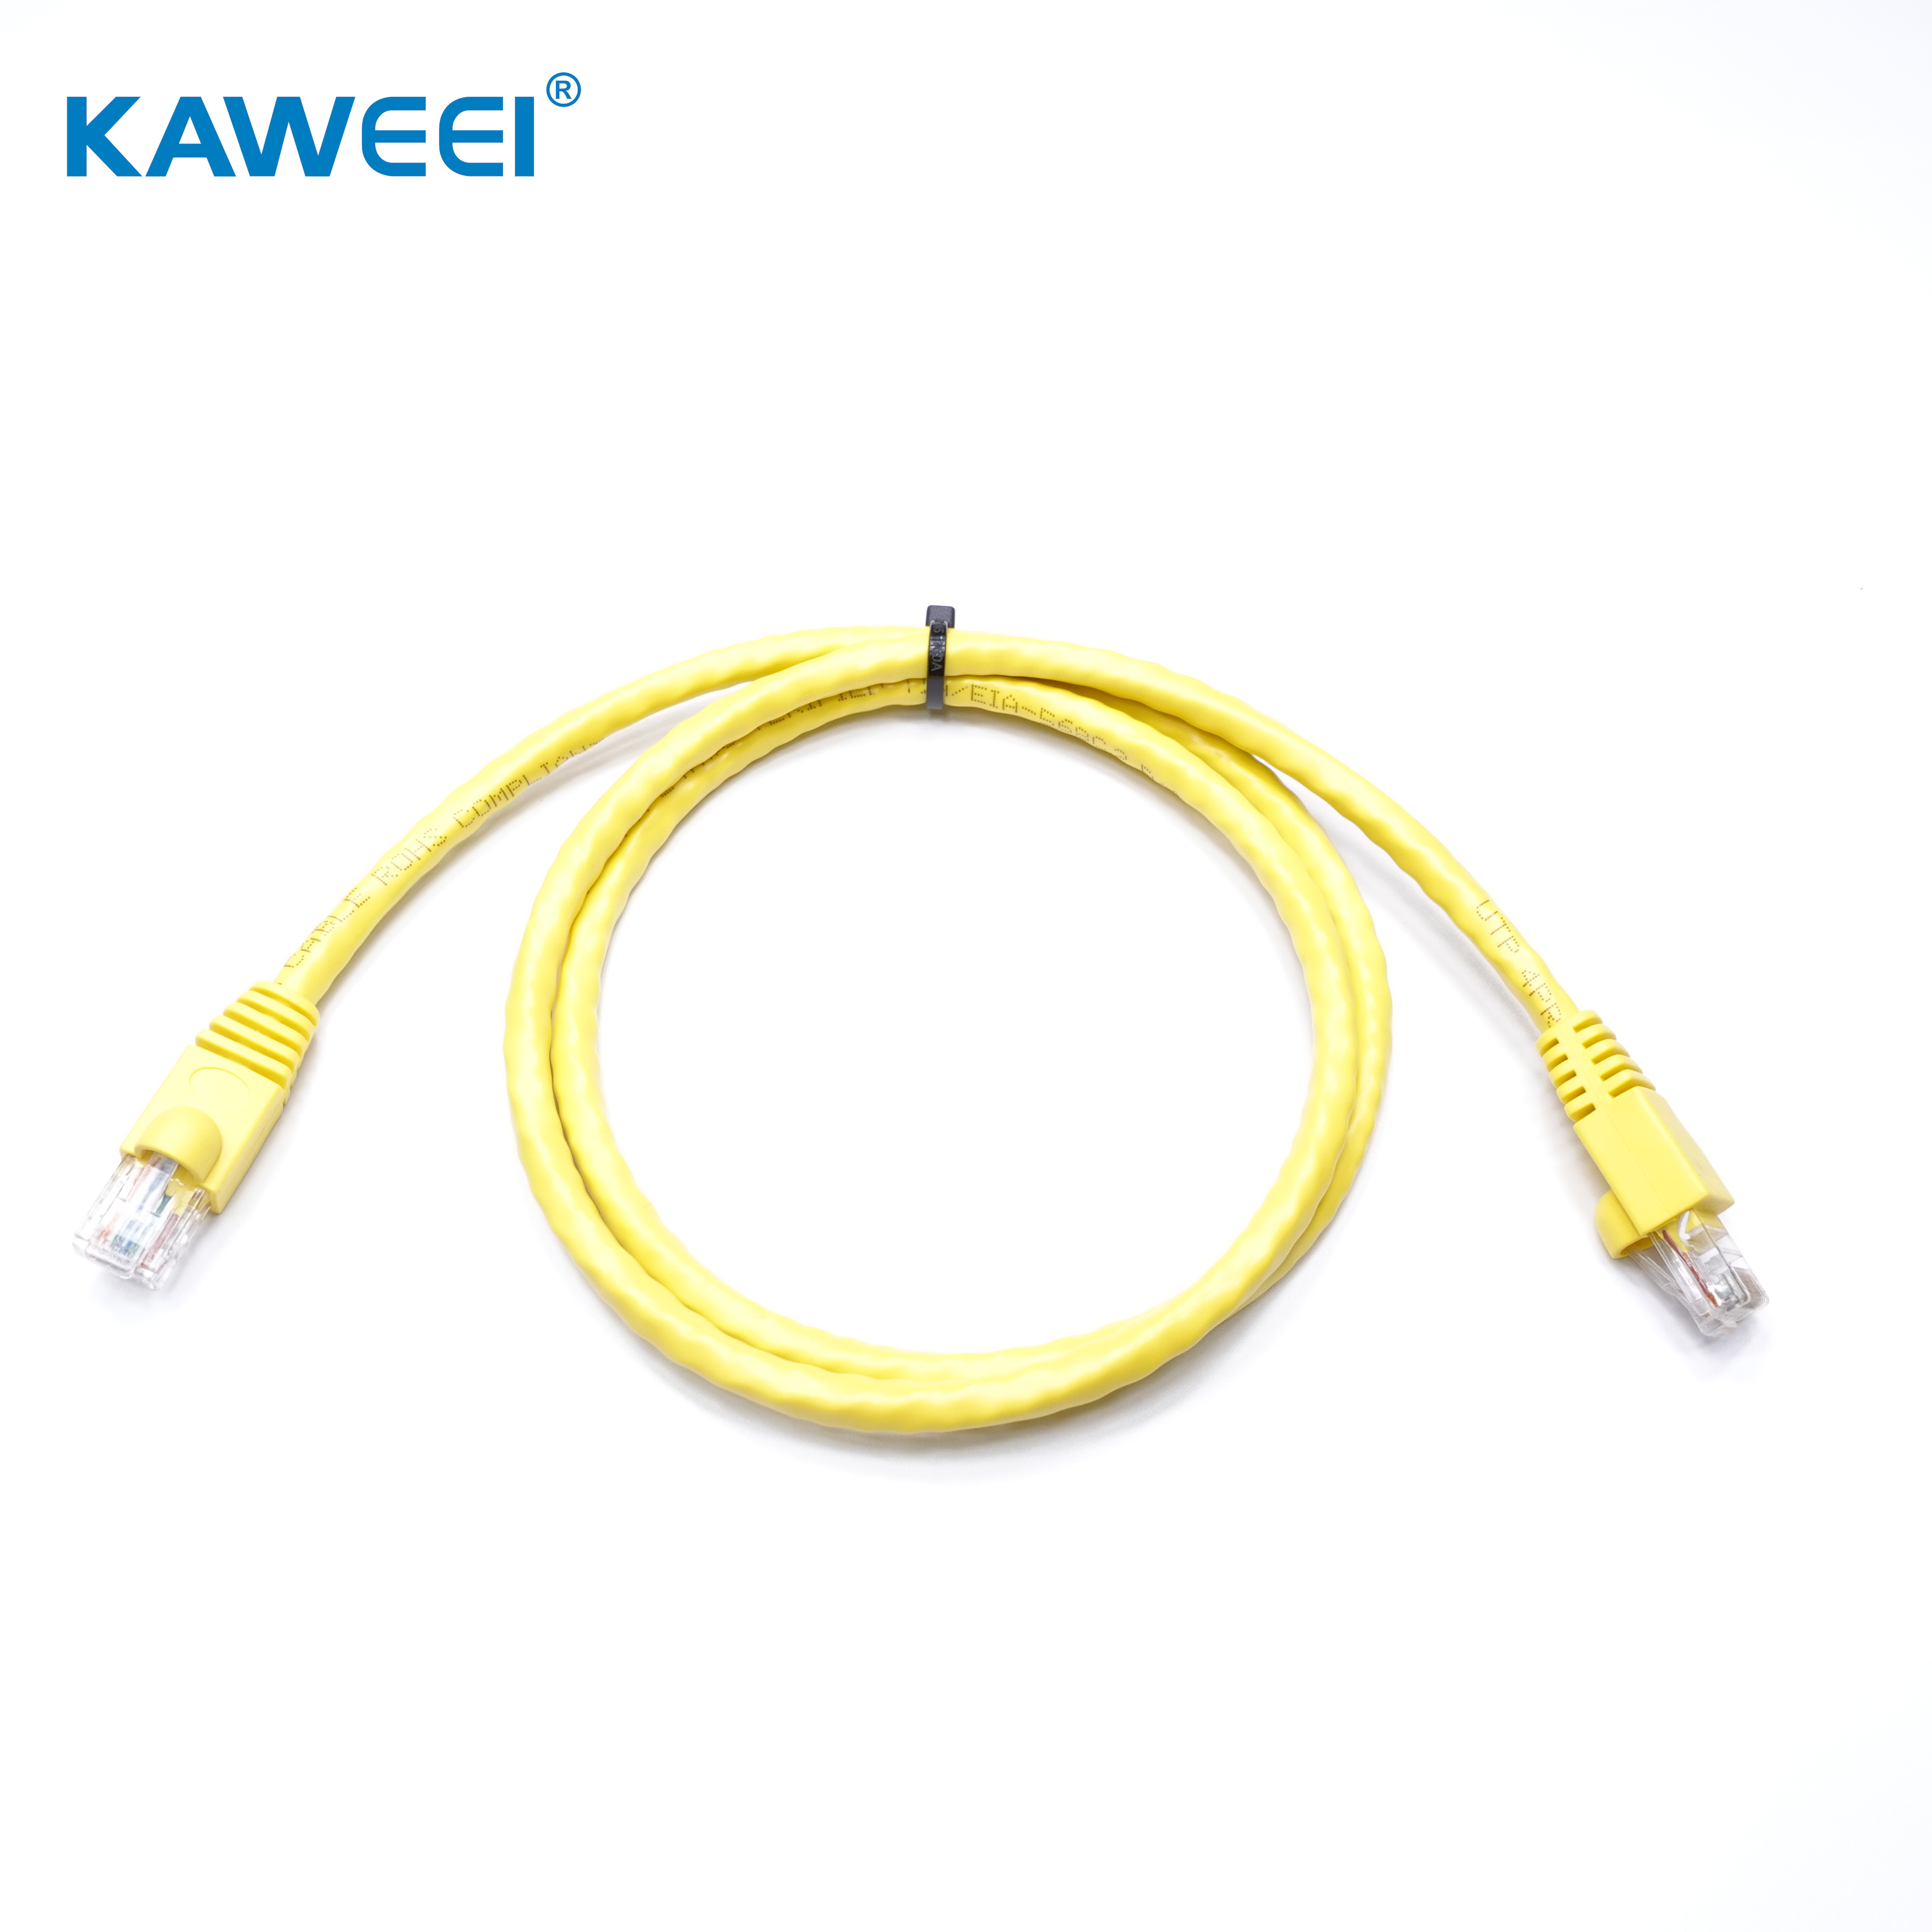  RJ45 to RJ45 CAT6 UTP Industrial network cable for computer printer